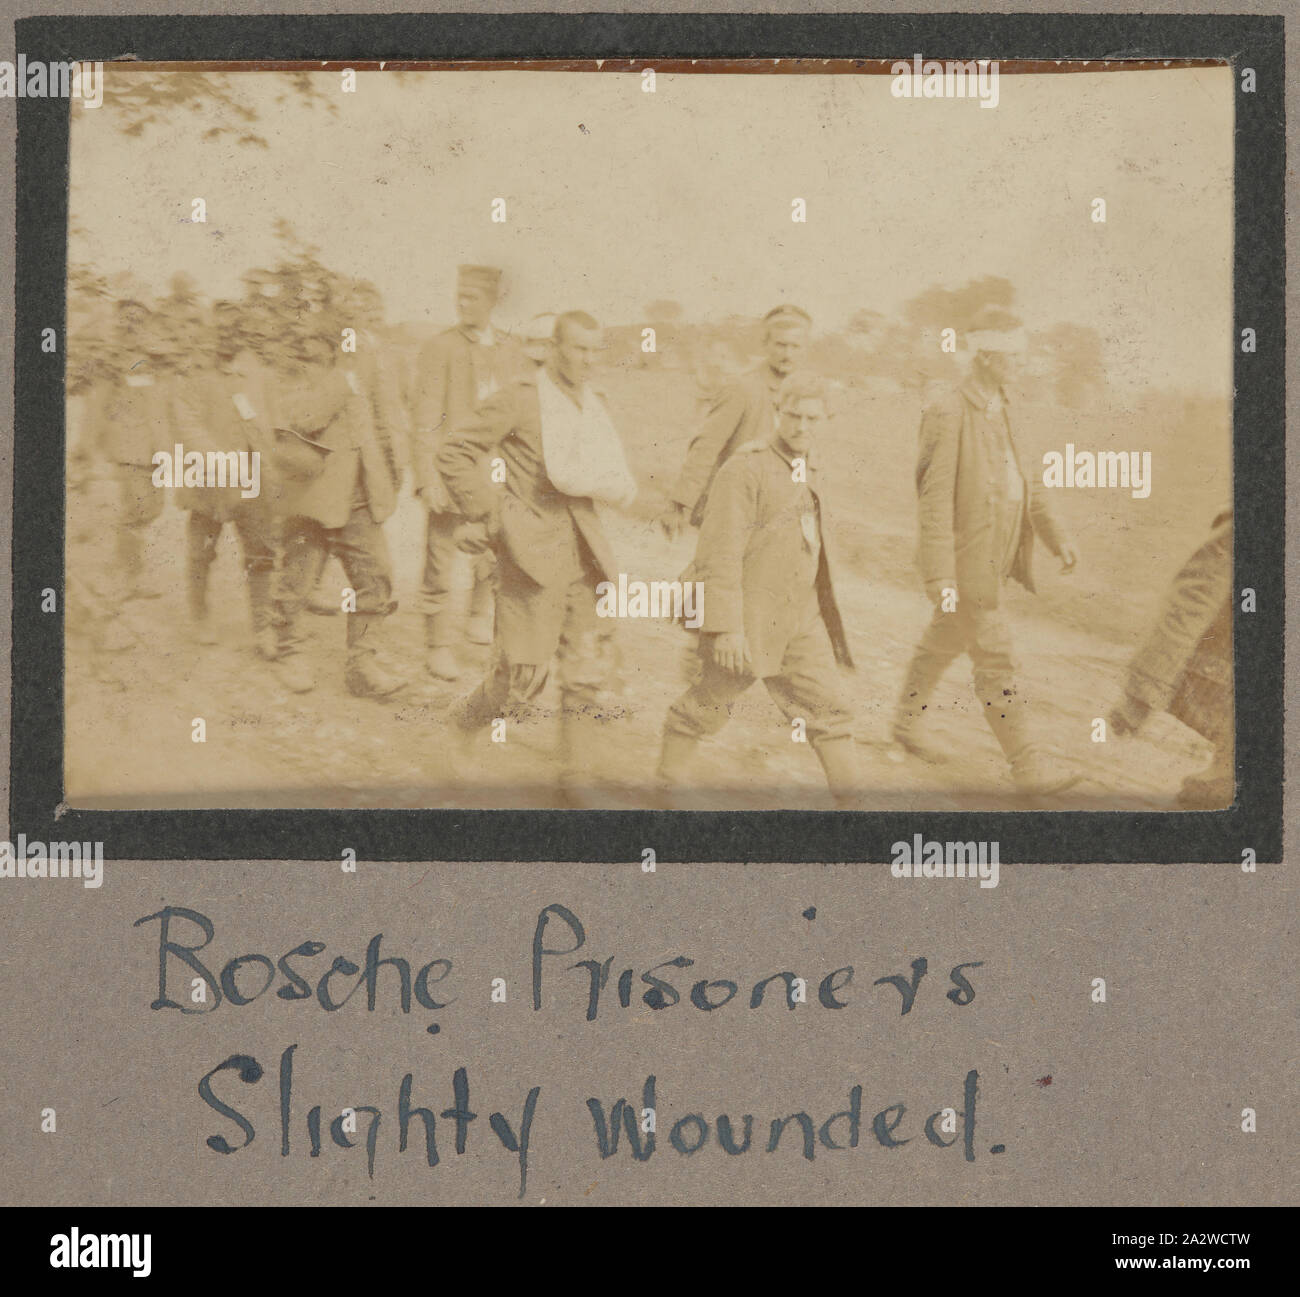 Photograph - 'Bosche Prisoners, Slightly Wounded', France, Sergeant John Lord, World War I, 1916-1917, Photograph which shows a group of slightly wounded German prisoners walking along a road. The caption underneath the photograph describes the soldiers as 'Bosche Prisoners'. The word Bosche was used as a colloquial term for German soldiers during World War I and World War II. The word is derived from the French phrase 'tete de boche' which during World War I was taken to mean 'hard headed Stock Photo